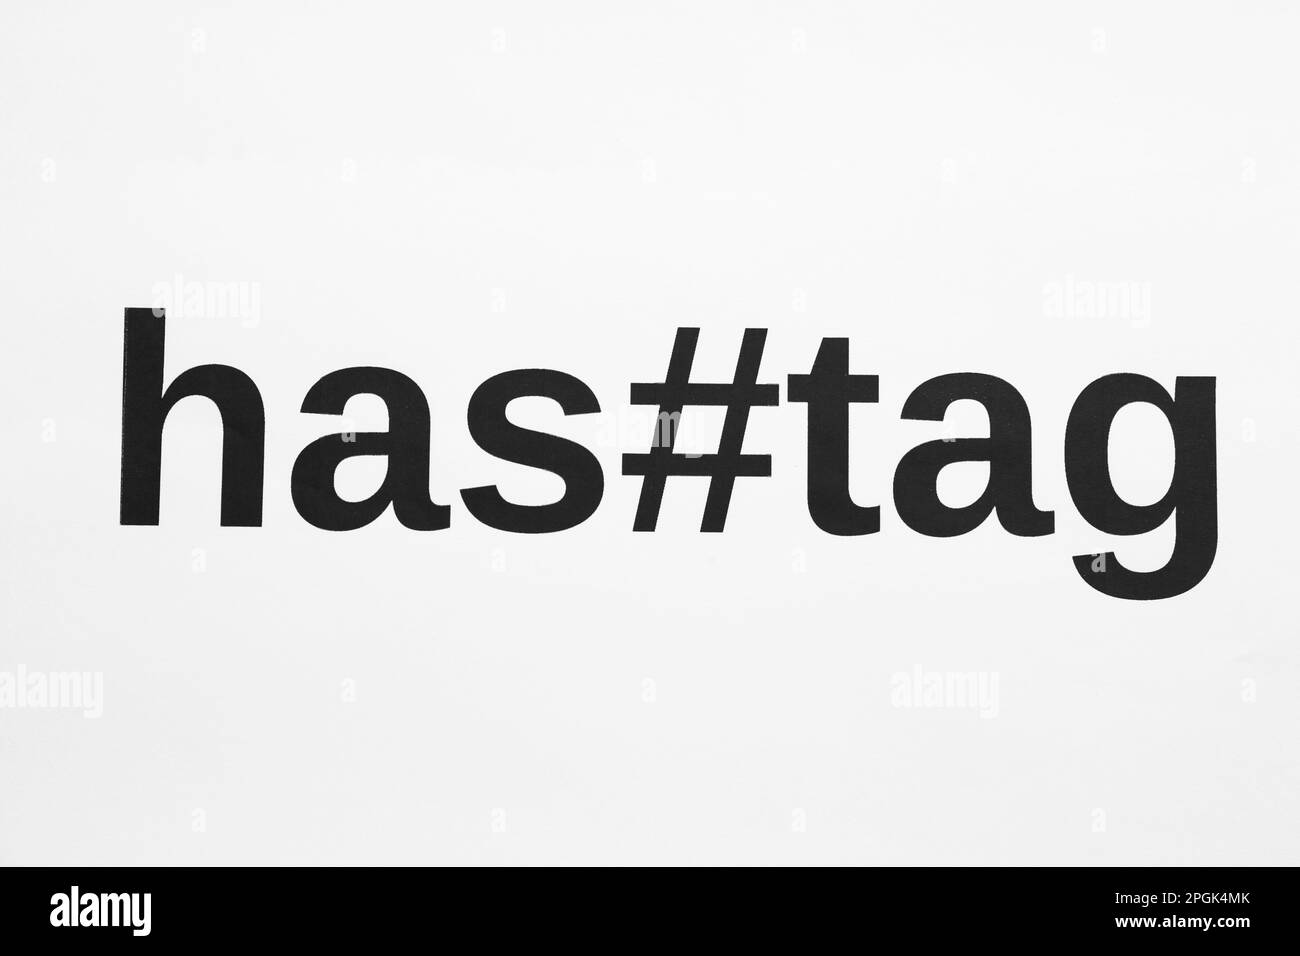 Word Hashtag with symbol on white background, top view Stock Photo